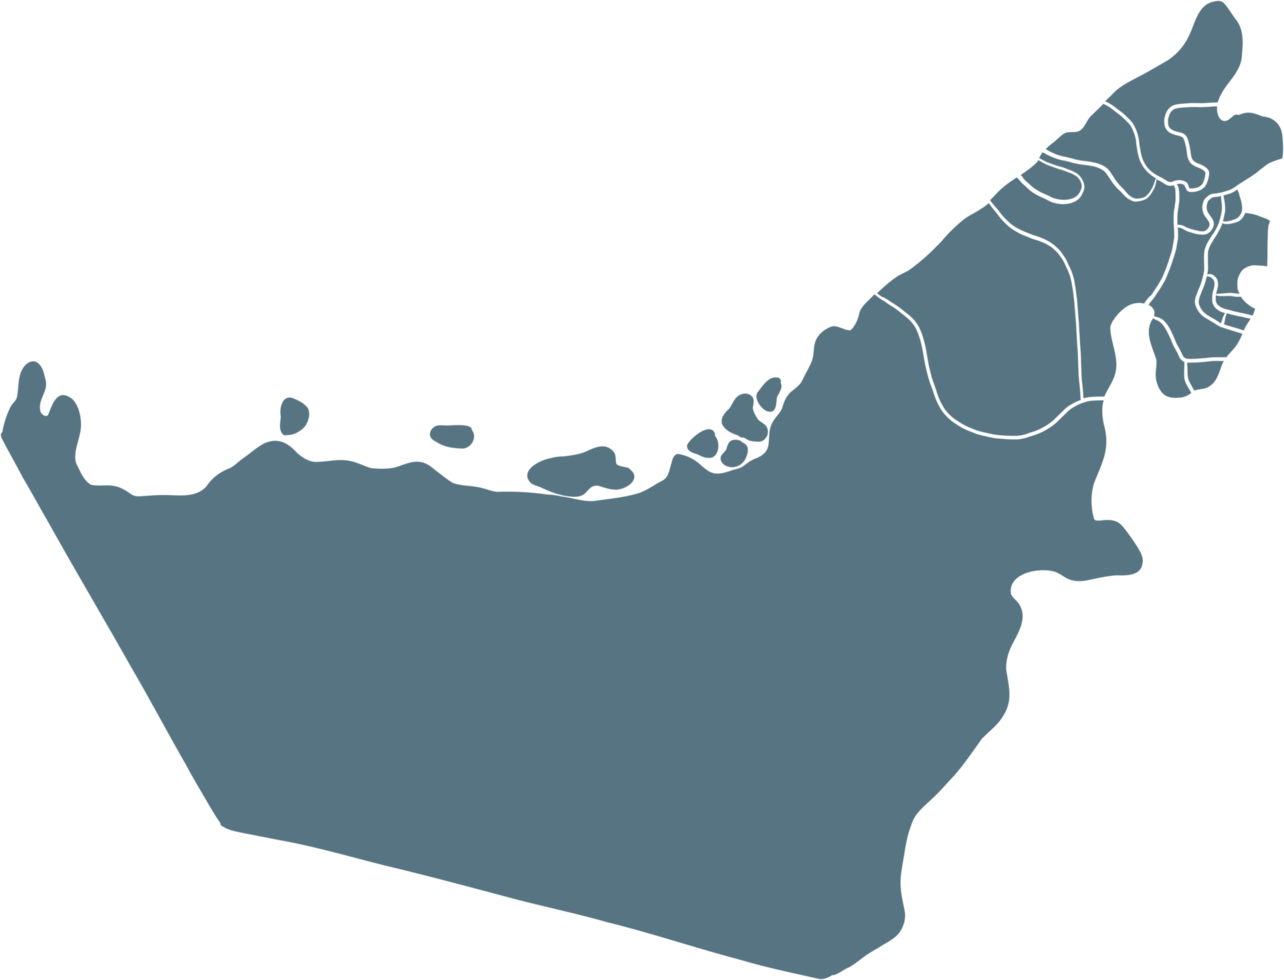 doodle freehand drawing of united arab emirates map. png